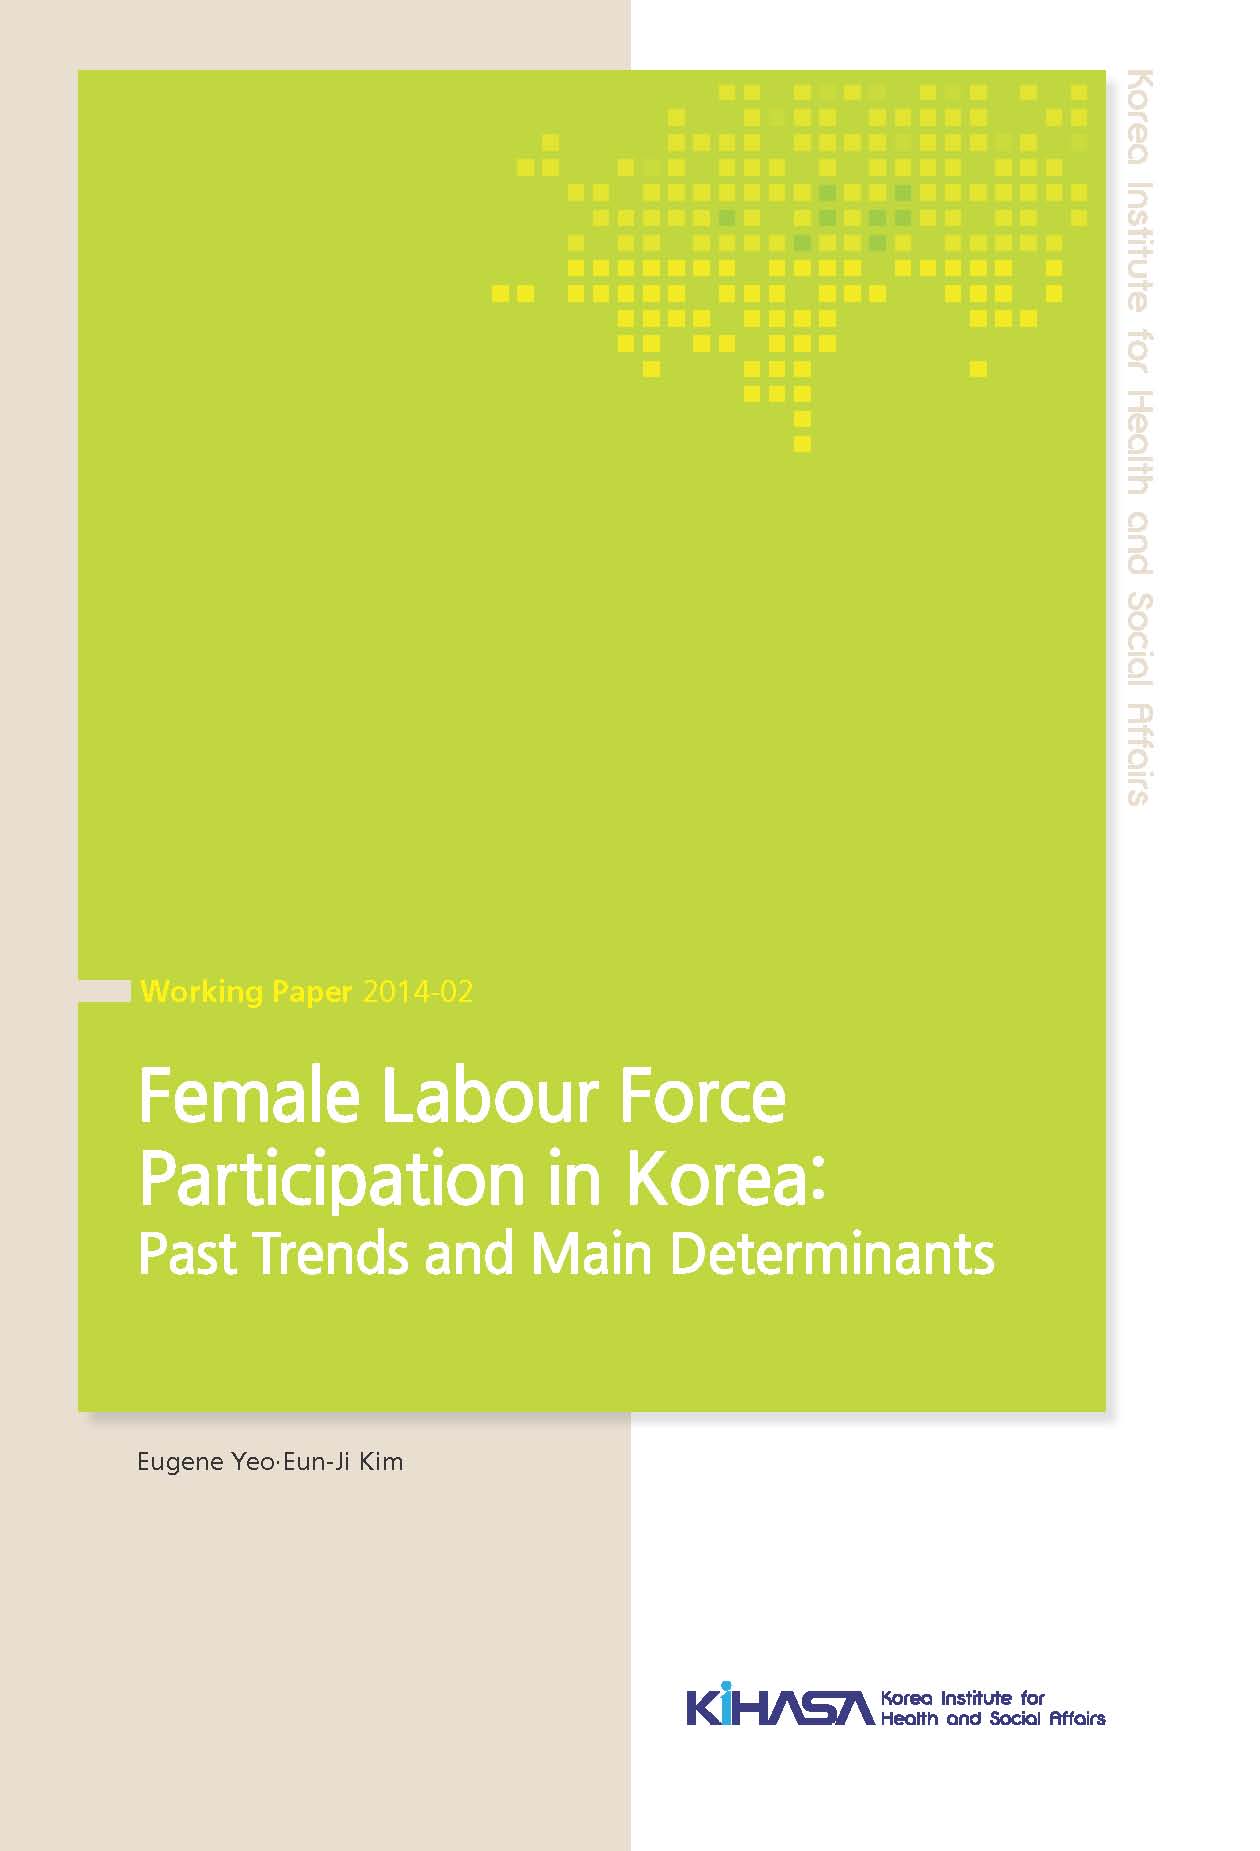 Female Labour Force Participation in Korea: Past Trends and Main Determinants